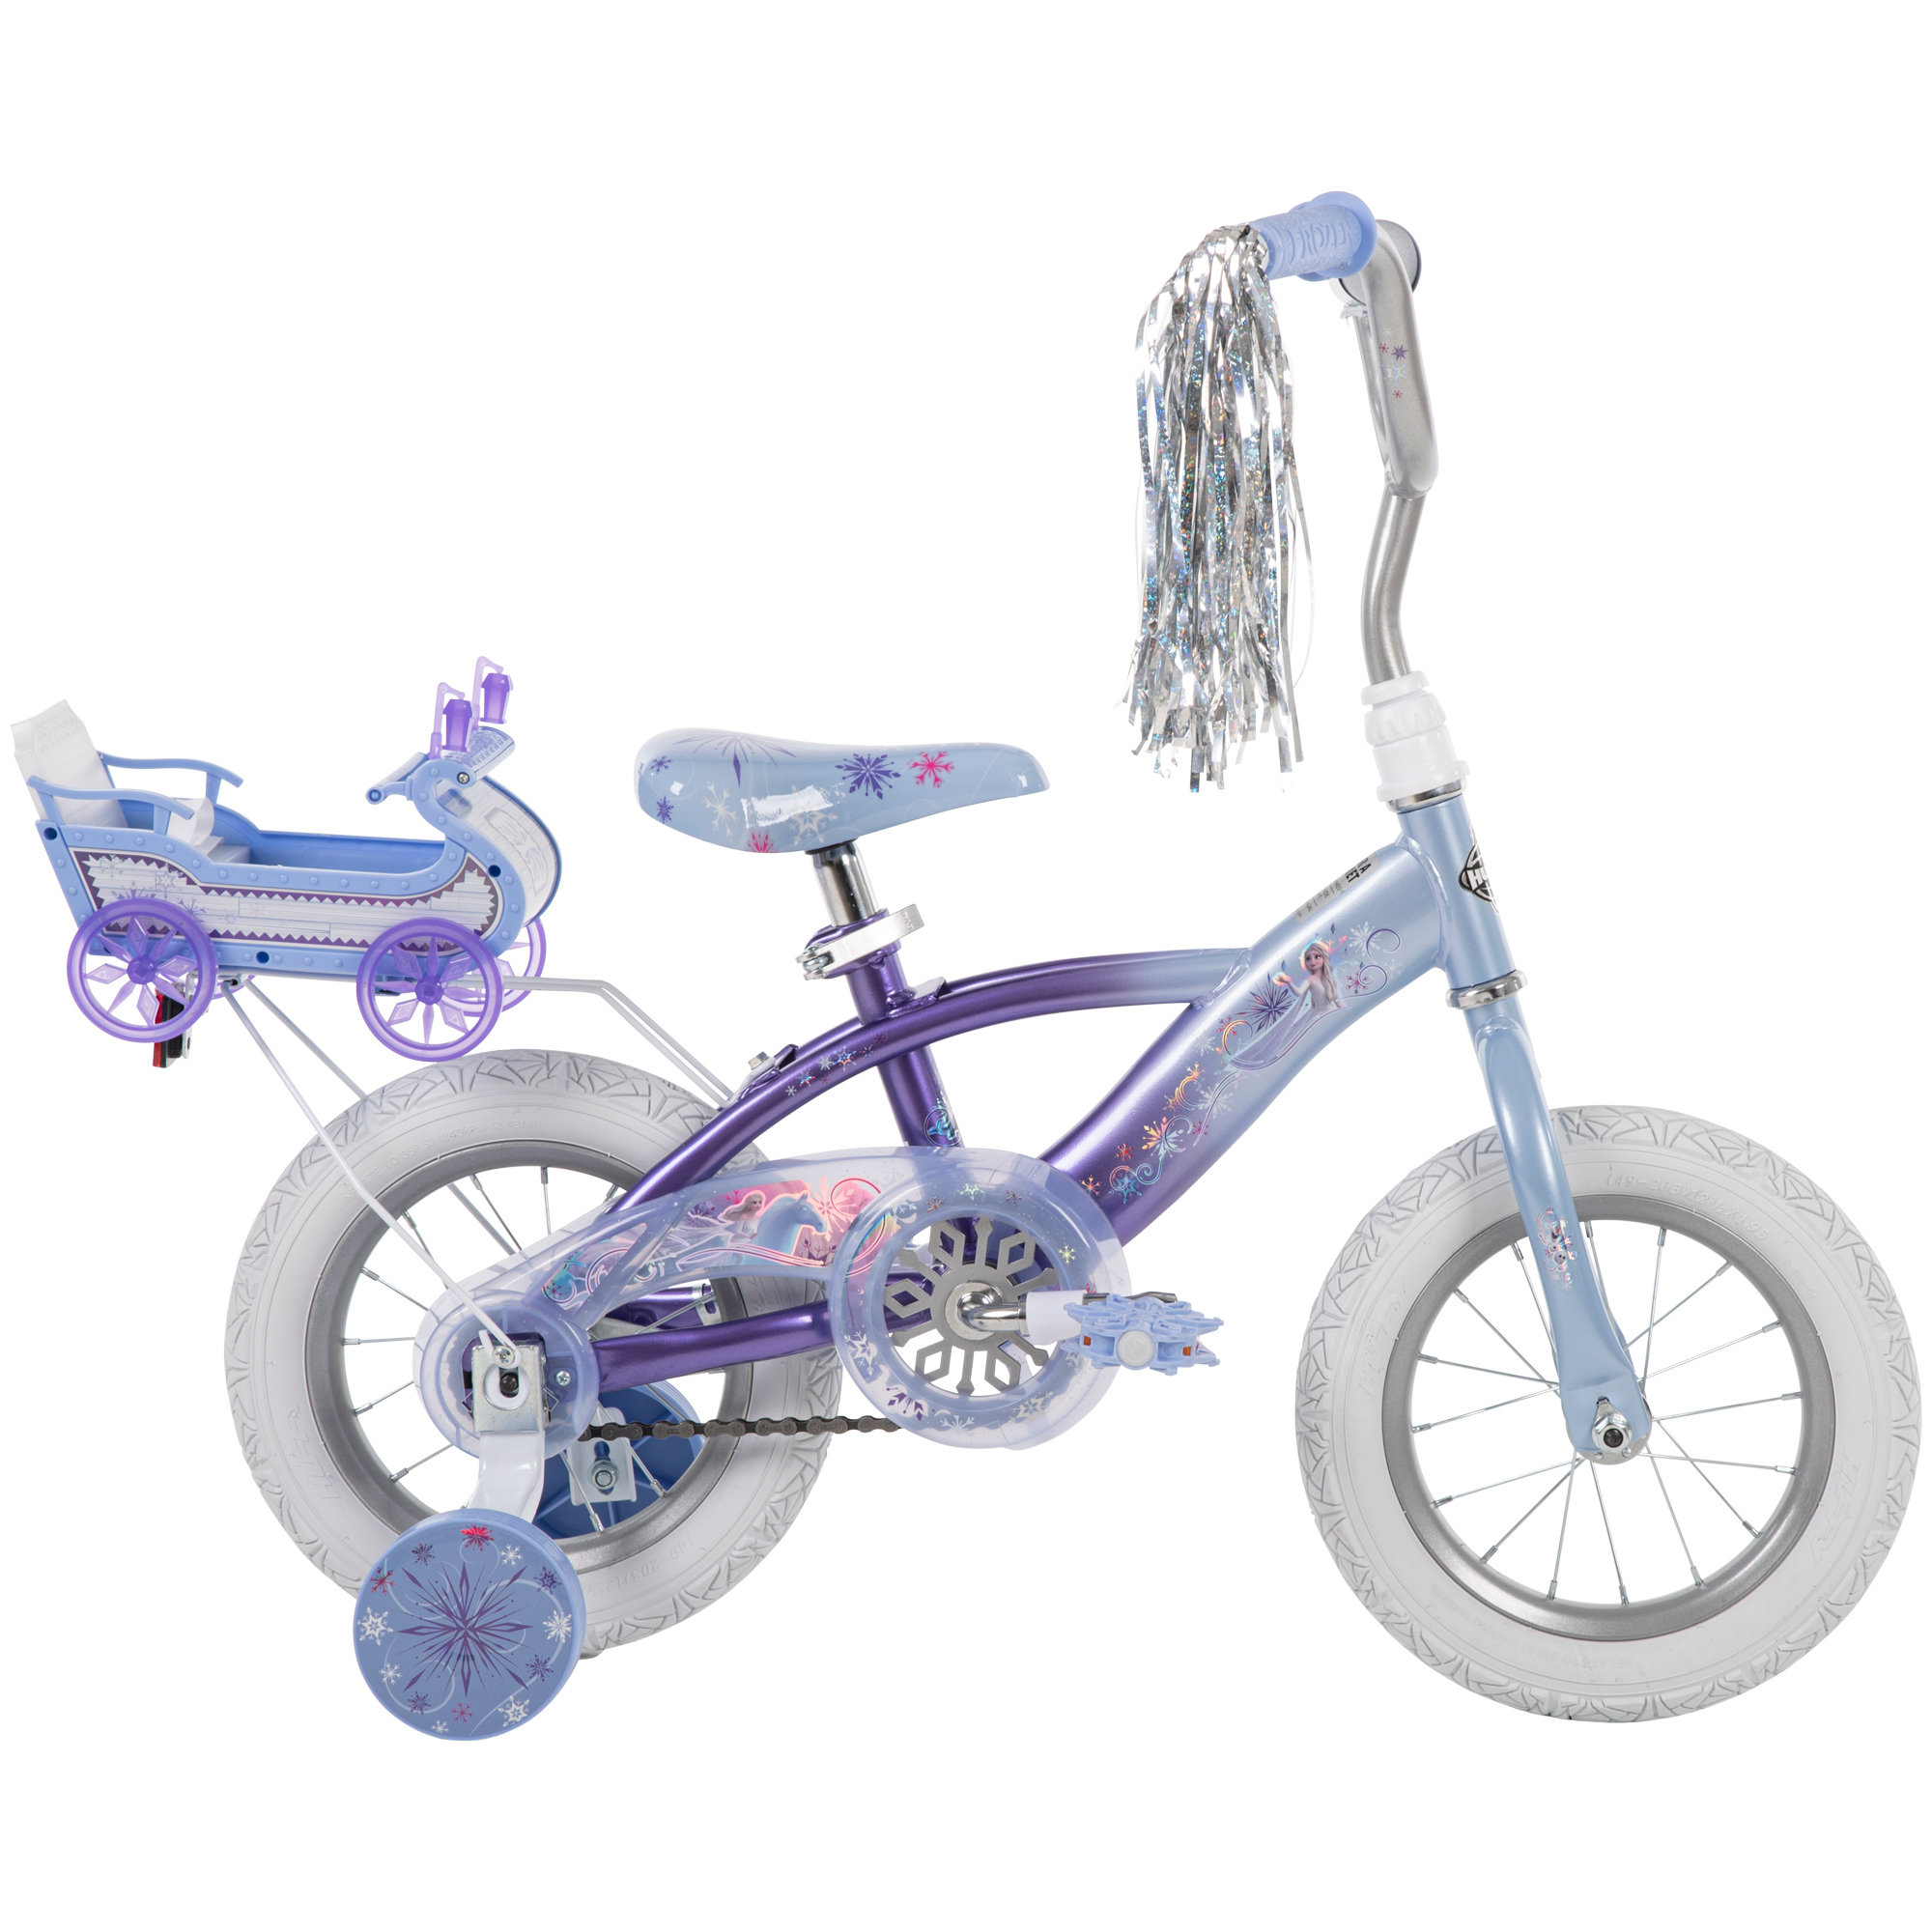 Disney Frozen 12 in. Bike with Doll Carrier Sleigh for Girl's, Ages 2+ Years, White and Purple by Huffy - image 1 of 19